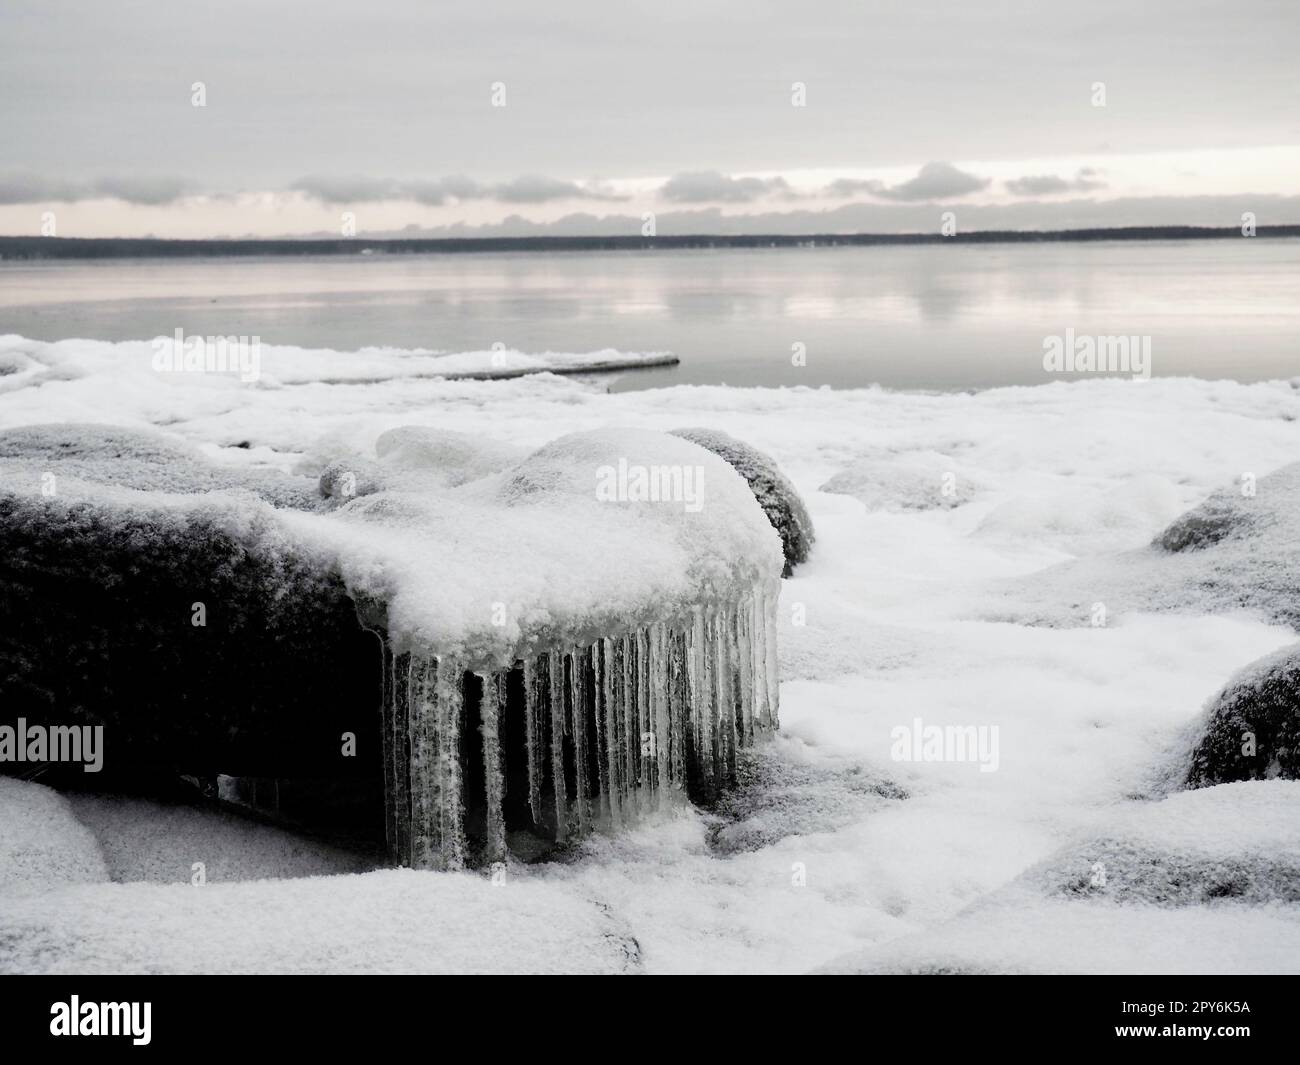 Ice icicles hanging down. Northern arctic winter season. Frozen nature. Retro or vintage style. Black and white image. Frozen water on the lake. Karelia, Russia, December 2020. Lake Onega Stock Photo